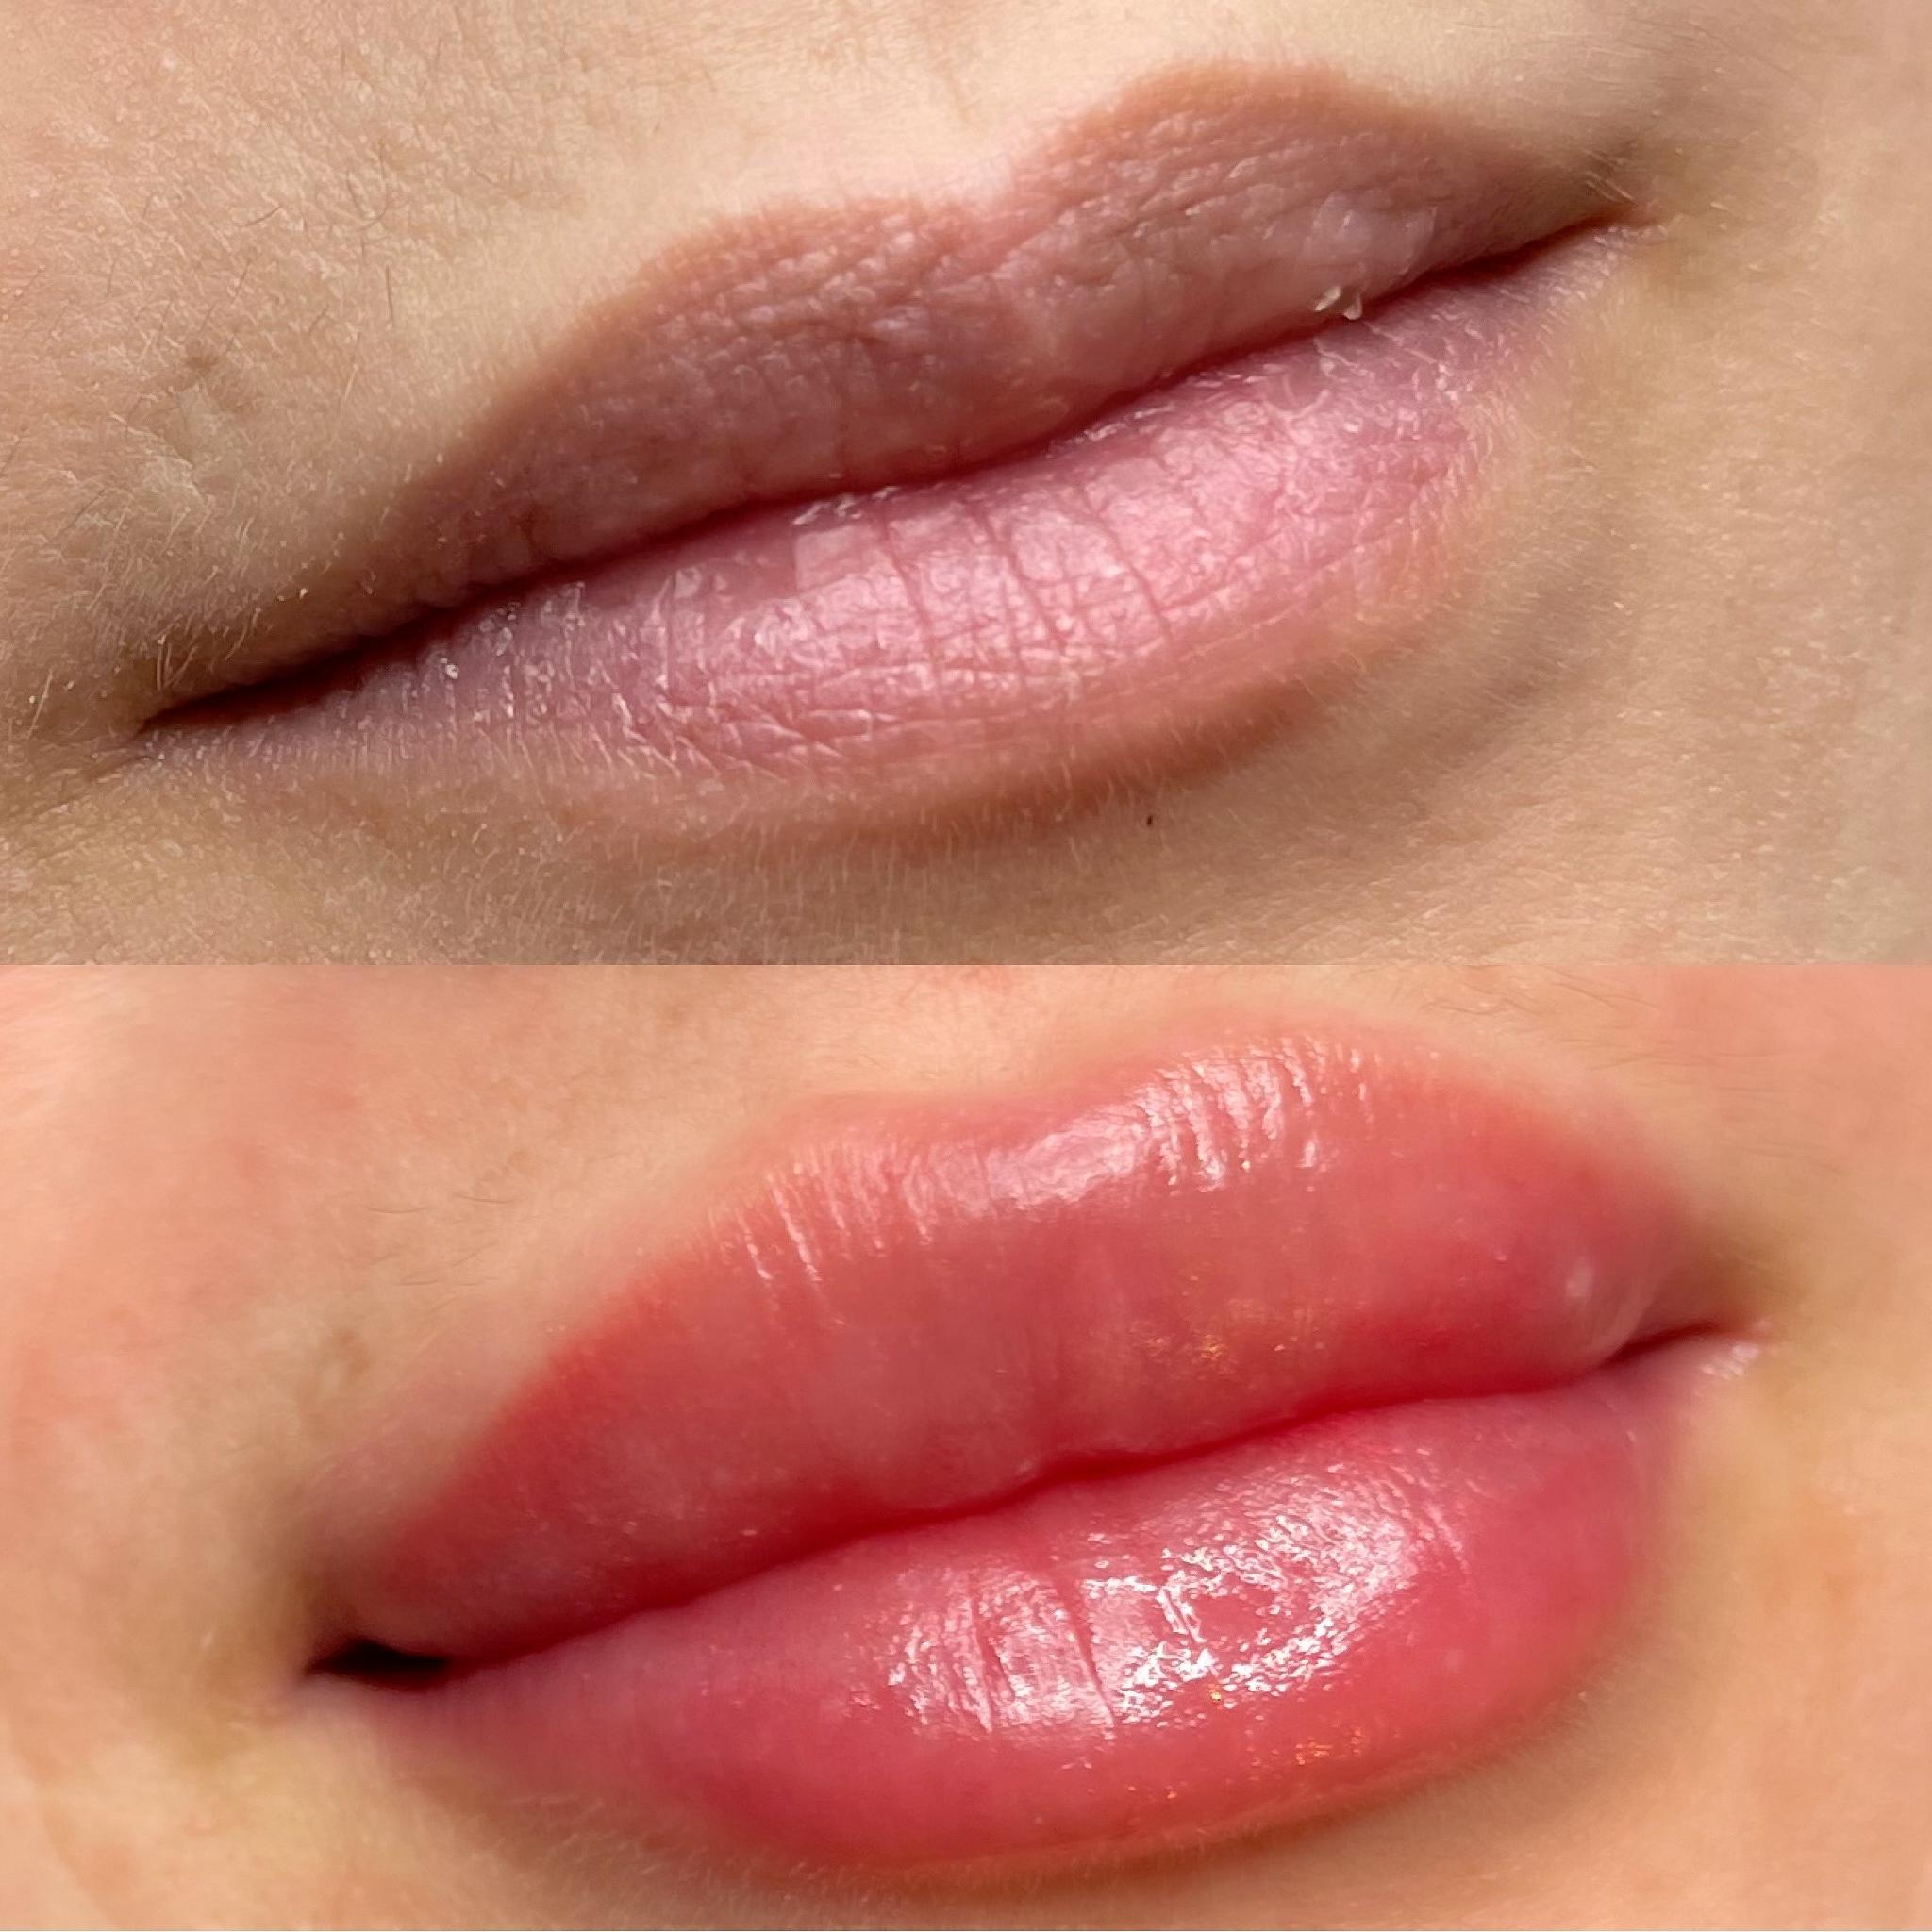 Get Younger-Looking Lips & Change Your Life With Fort Lee, NJ PMU Lip Blushing